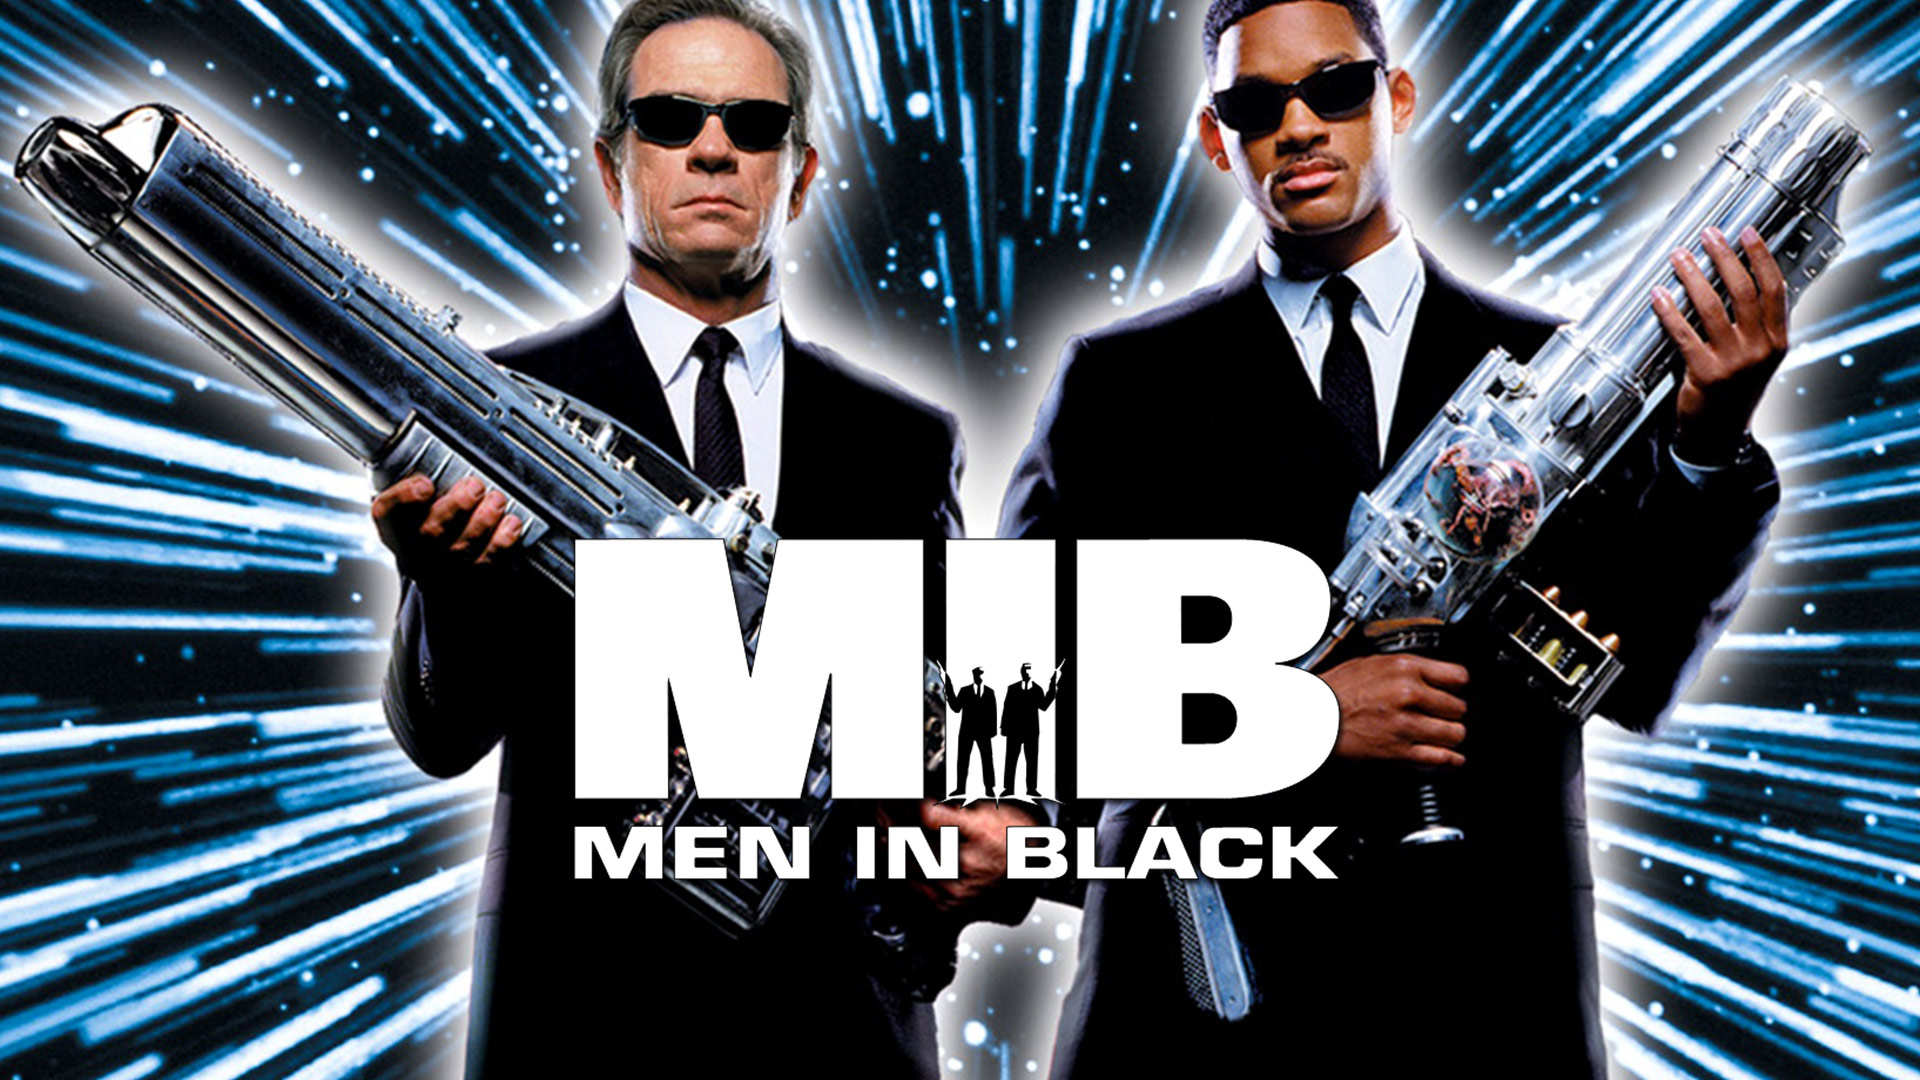 37-facts-about-the-movie-men-in-black